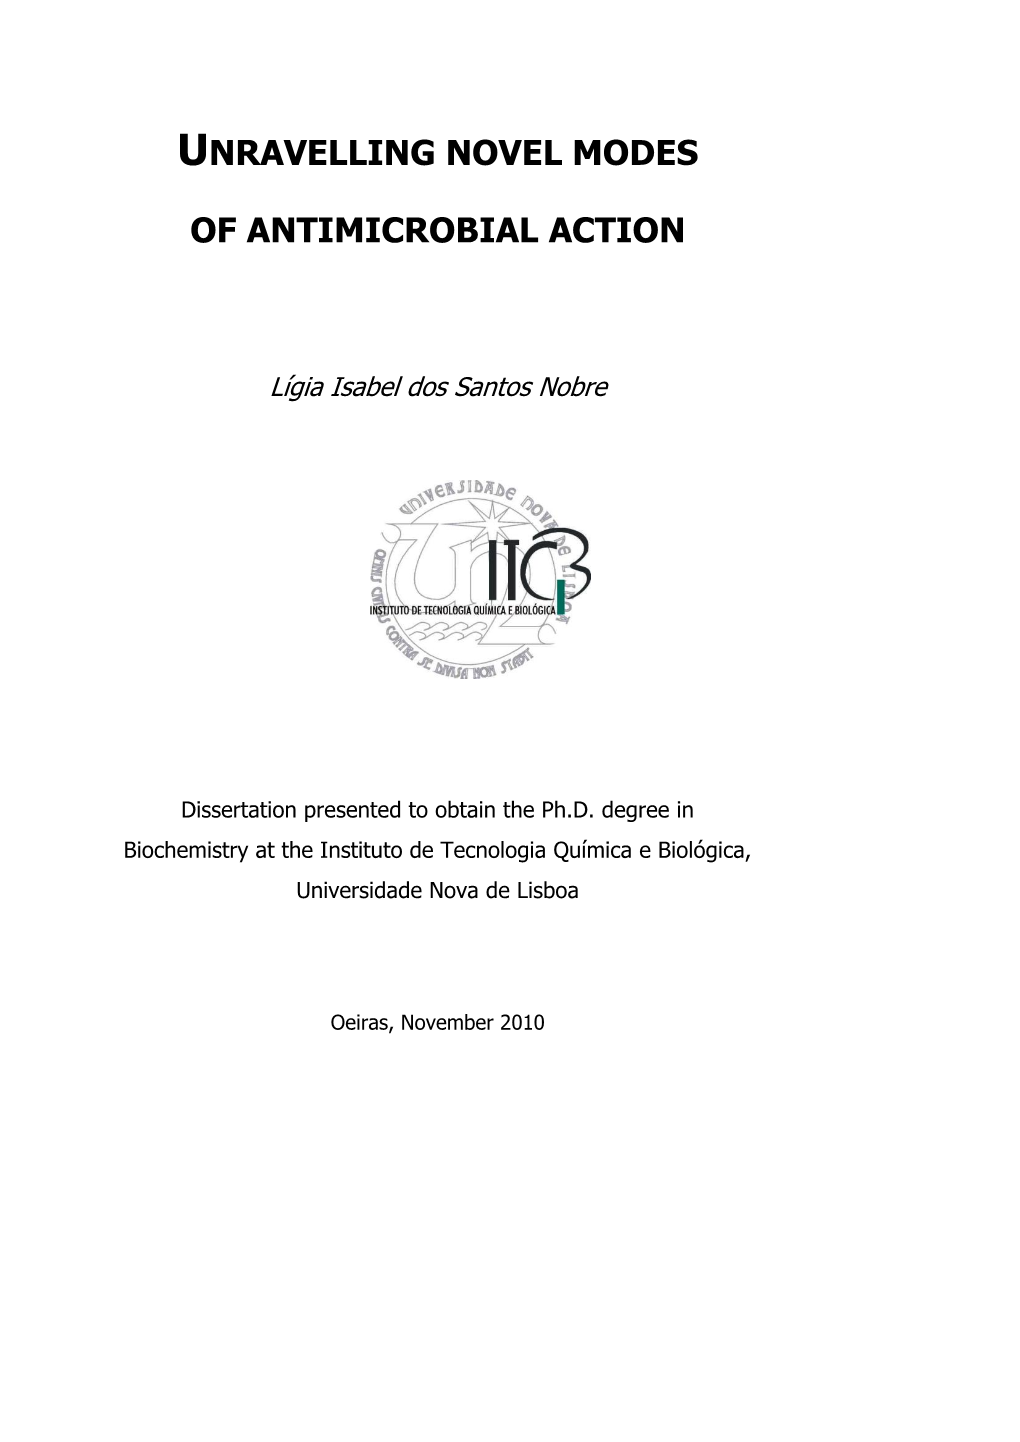 Unravelling Novel Modes of Antimicrobial Action